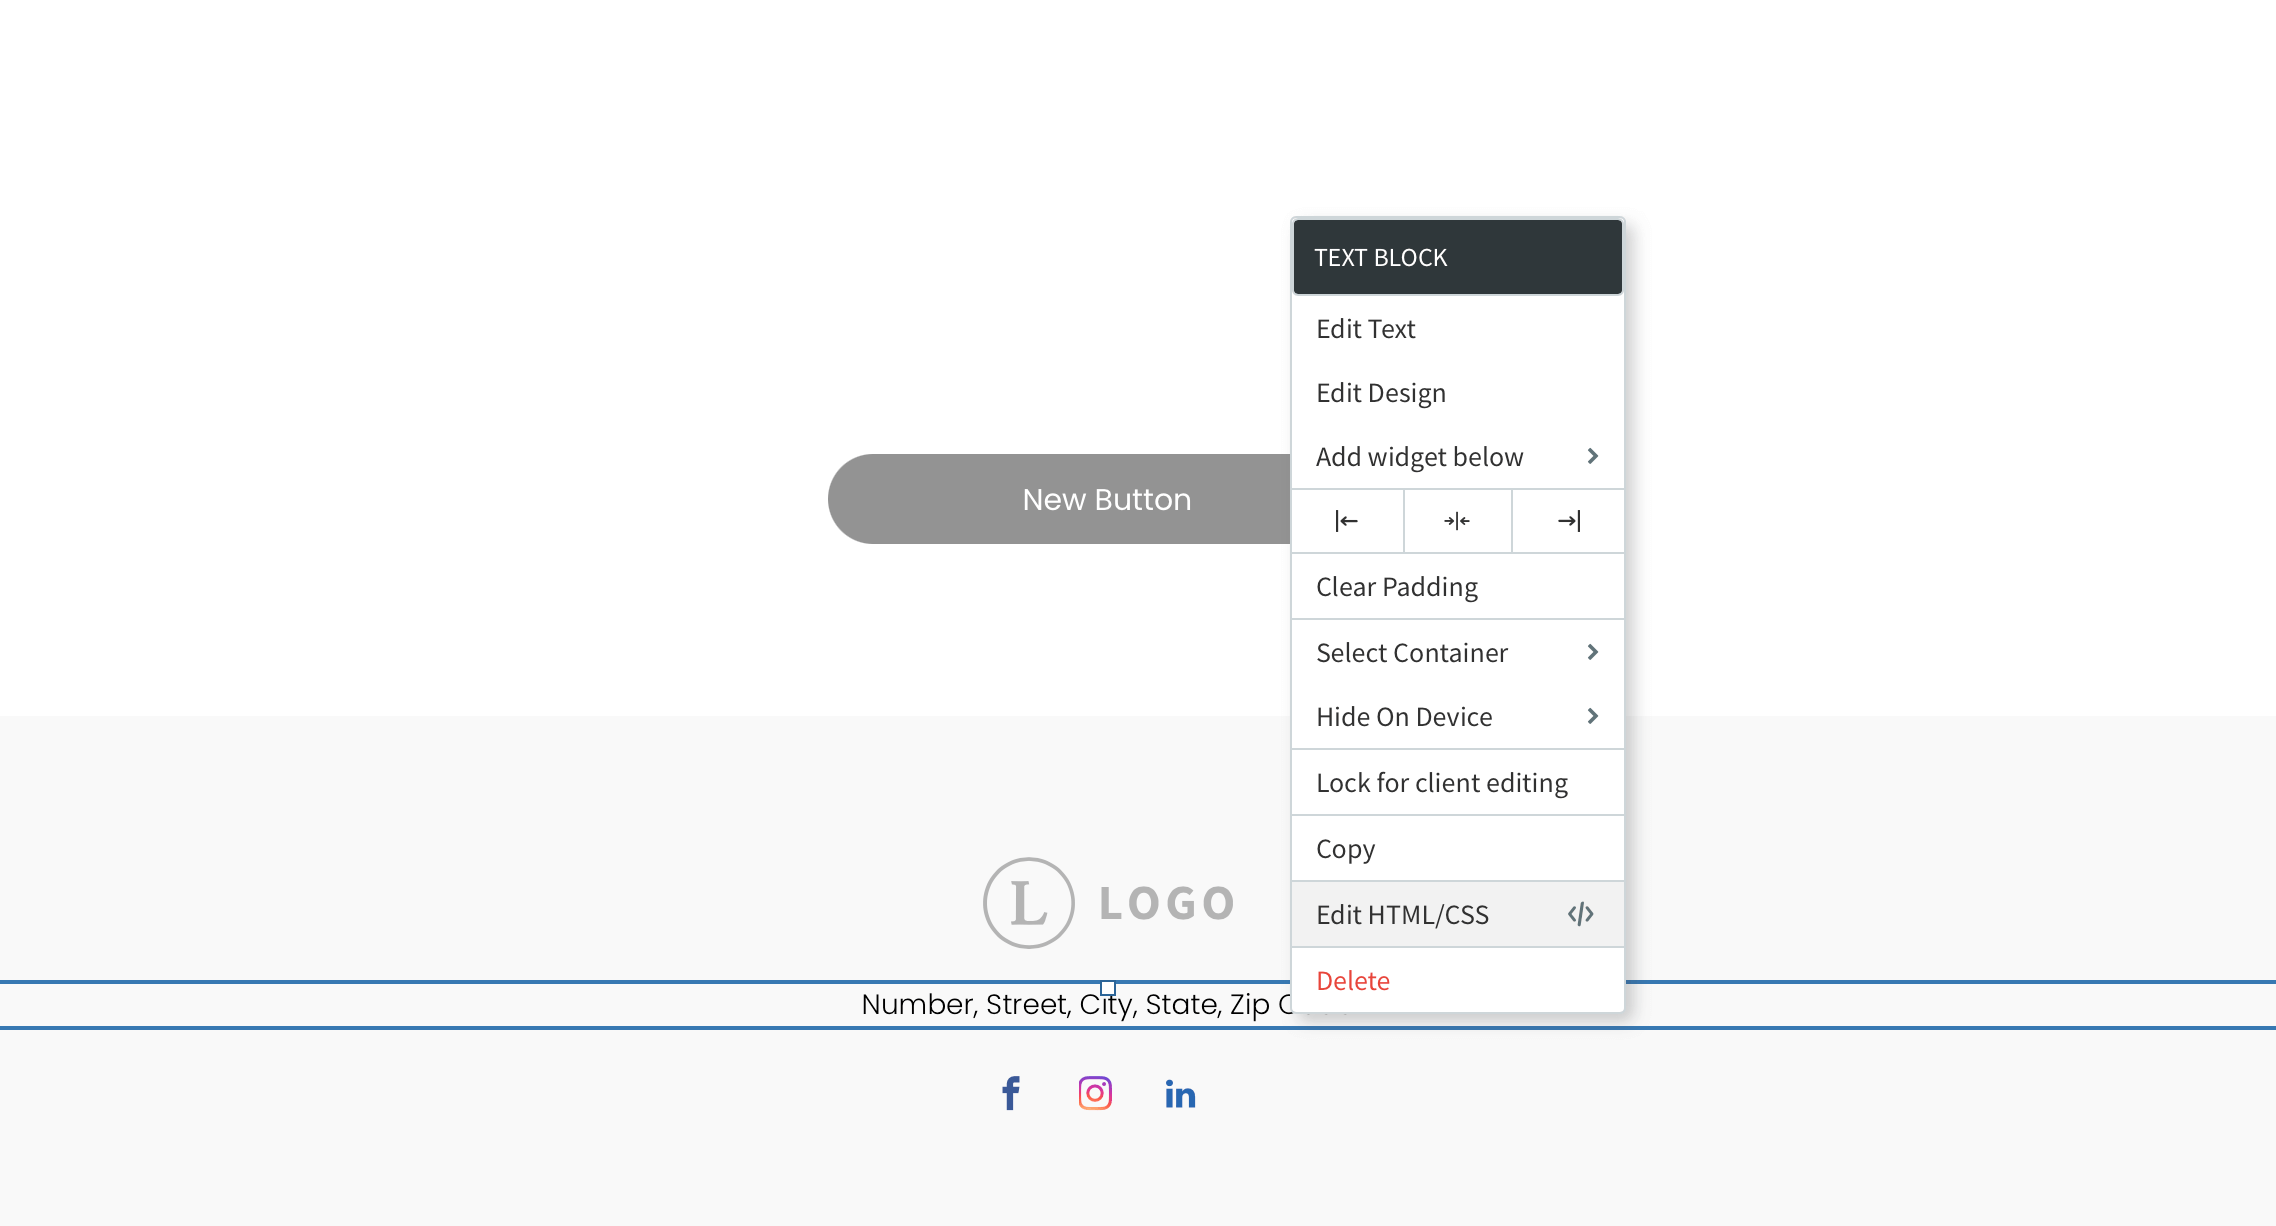 Right click menu with edit html/css highlighted